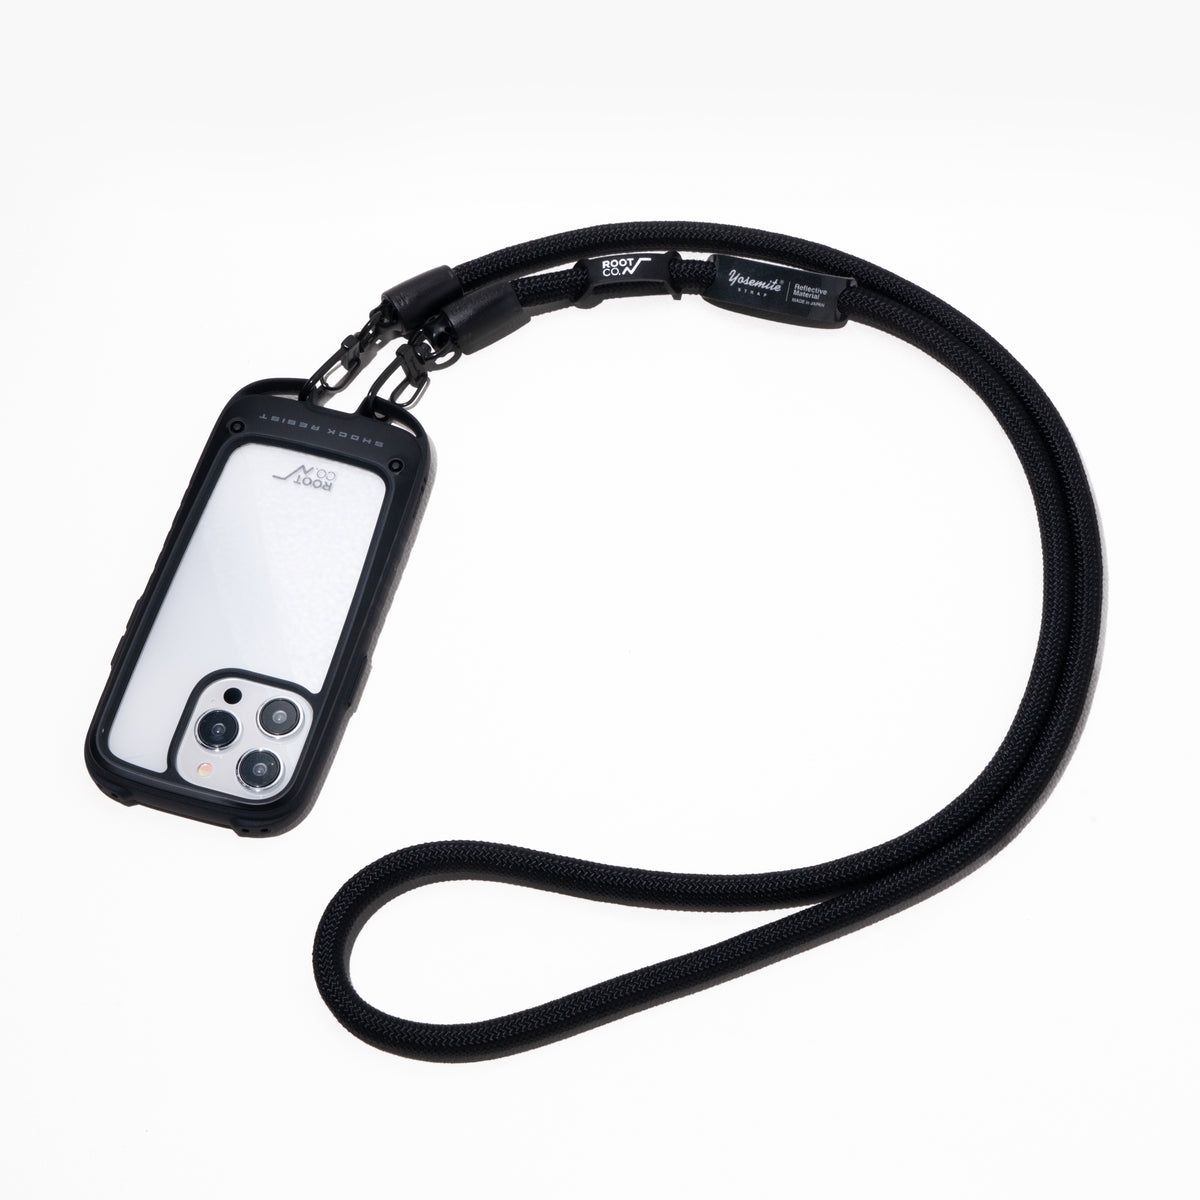 EPM X ROOT CO. YOSEMITE MOBILE STRAP / BLACK – Extended 